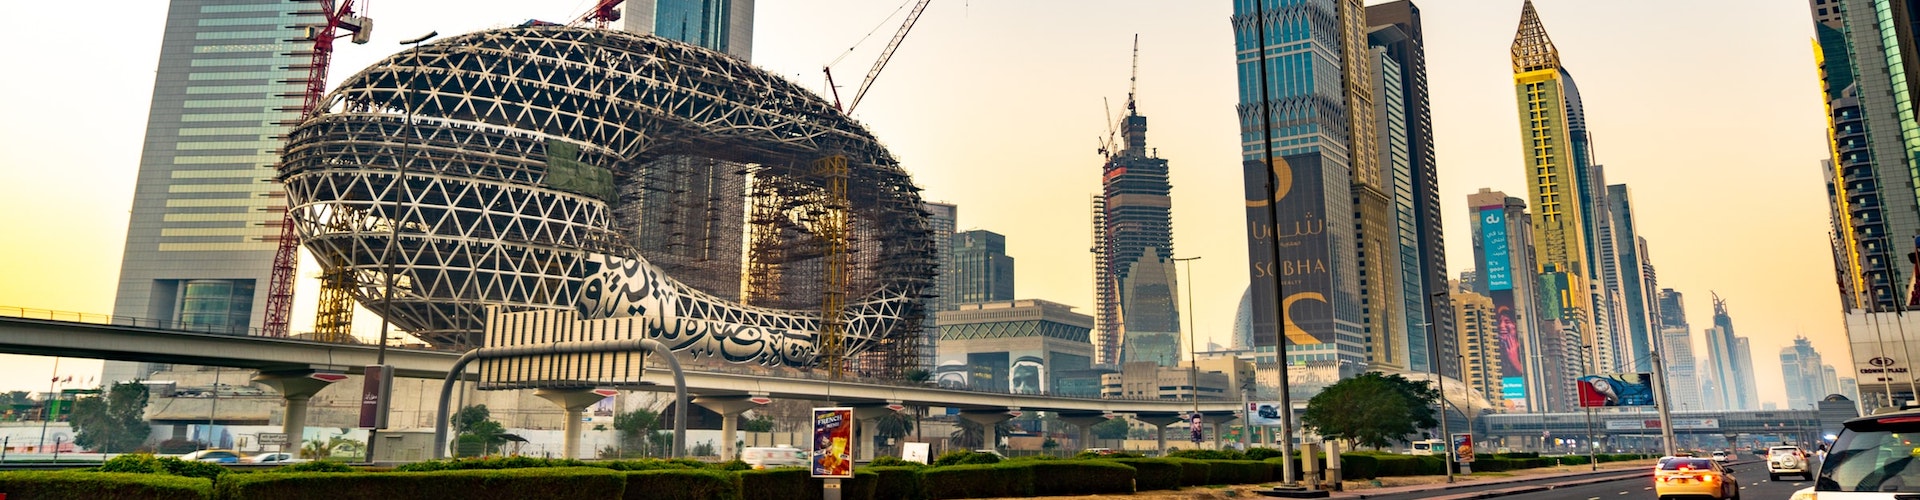 3D Printed Buildings in Dubai—How 3D Printing Construction Is Changing the World [INFOGRAPHIC]